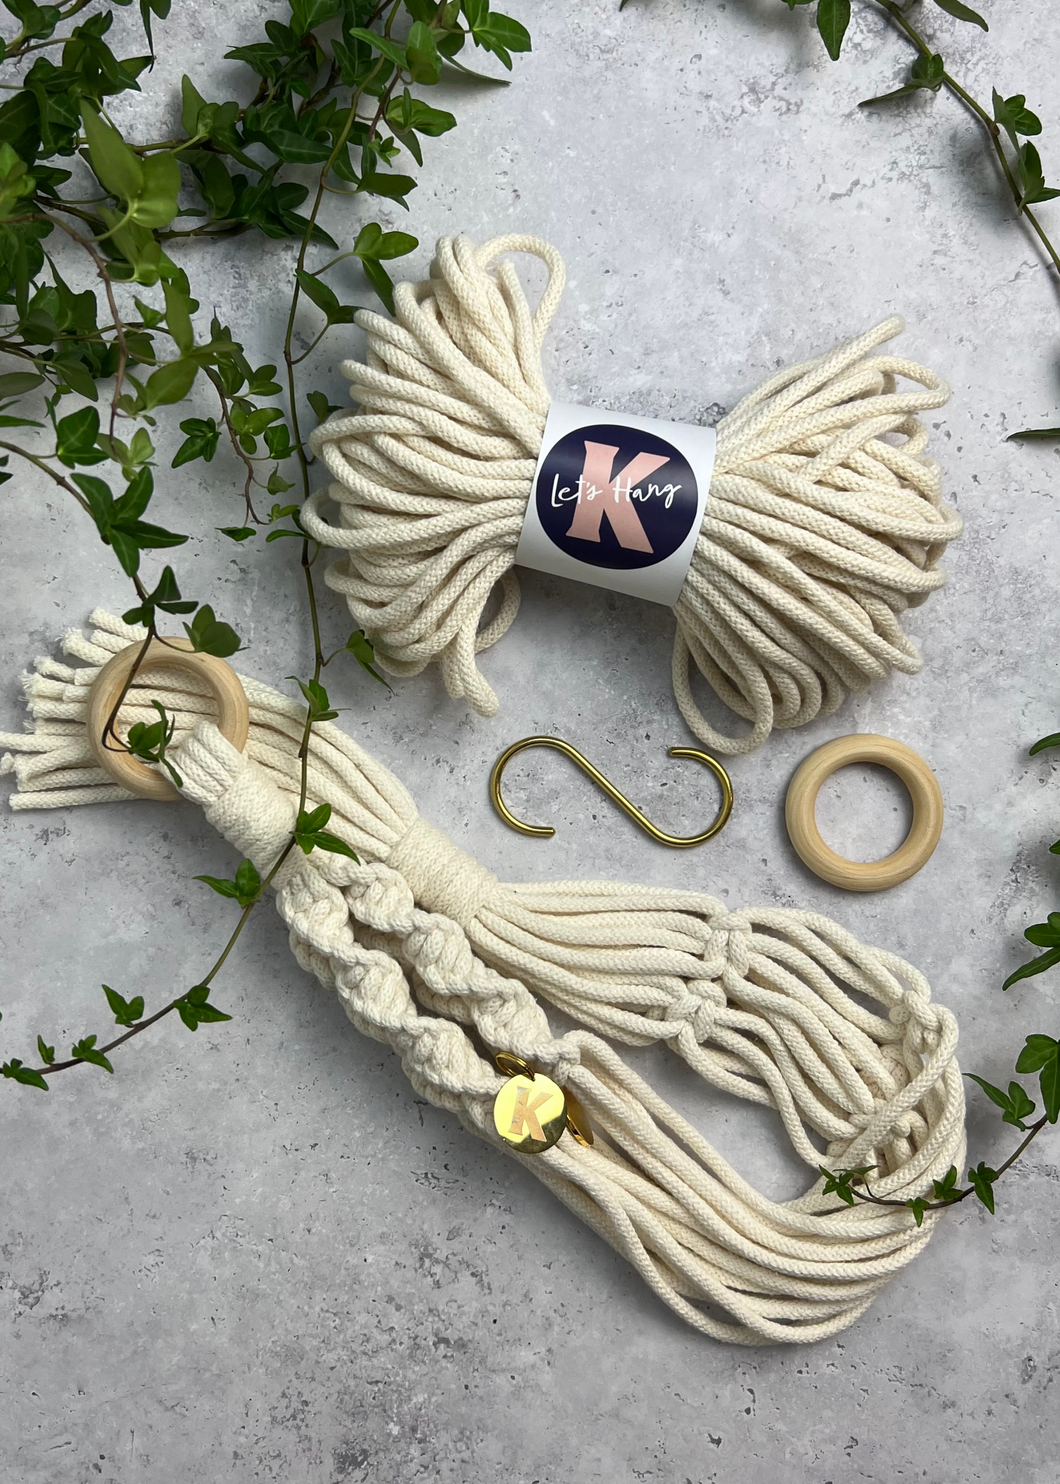 Make your own Macramé Plant Hanger kit in Vanilla, with brass S hook, engraved brass Knotted tag and wooden macramé ring.